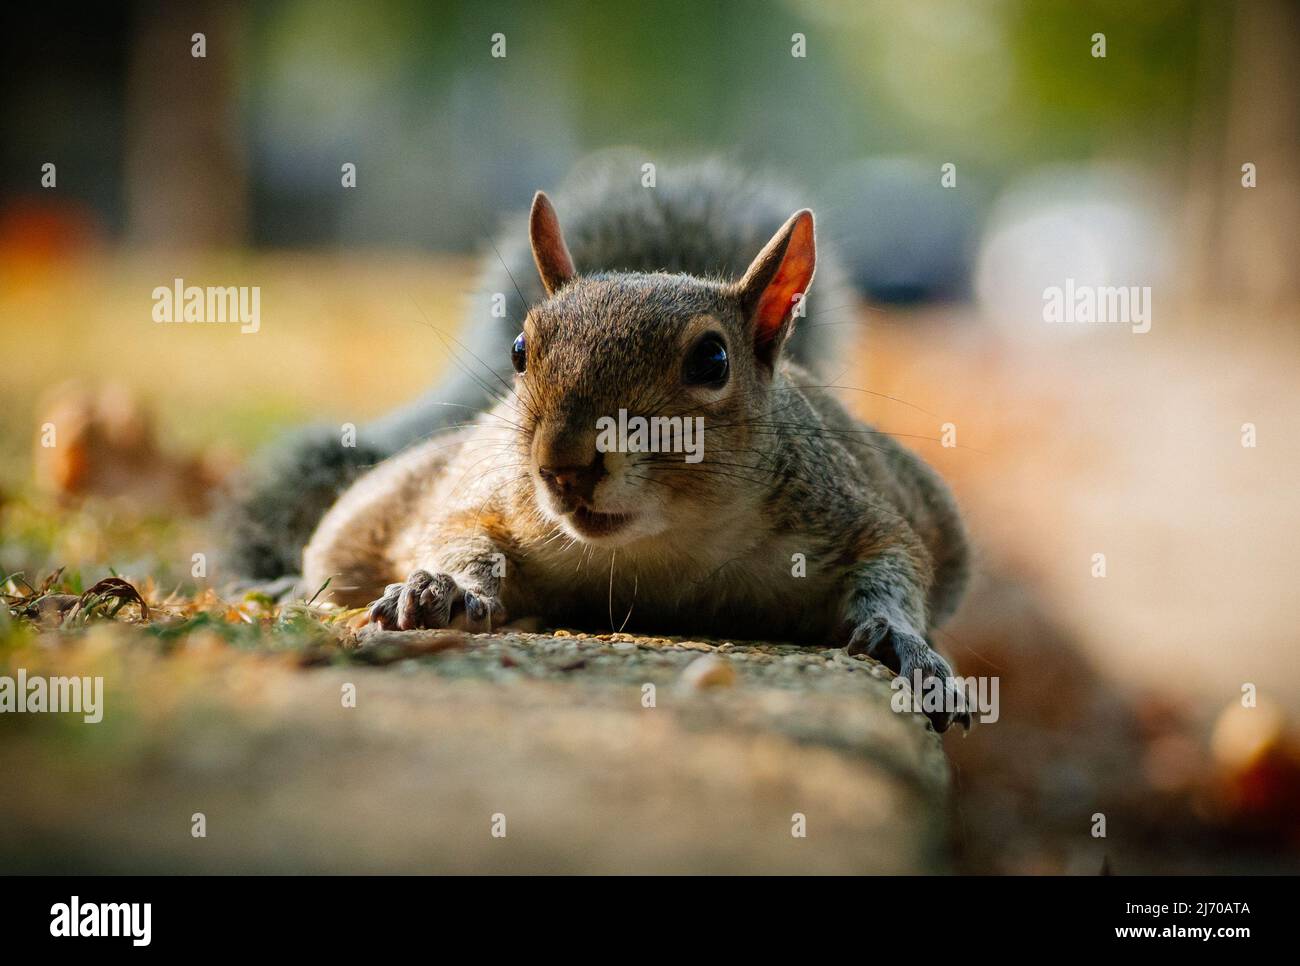 Squirrels in Turin Stock Photo